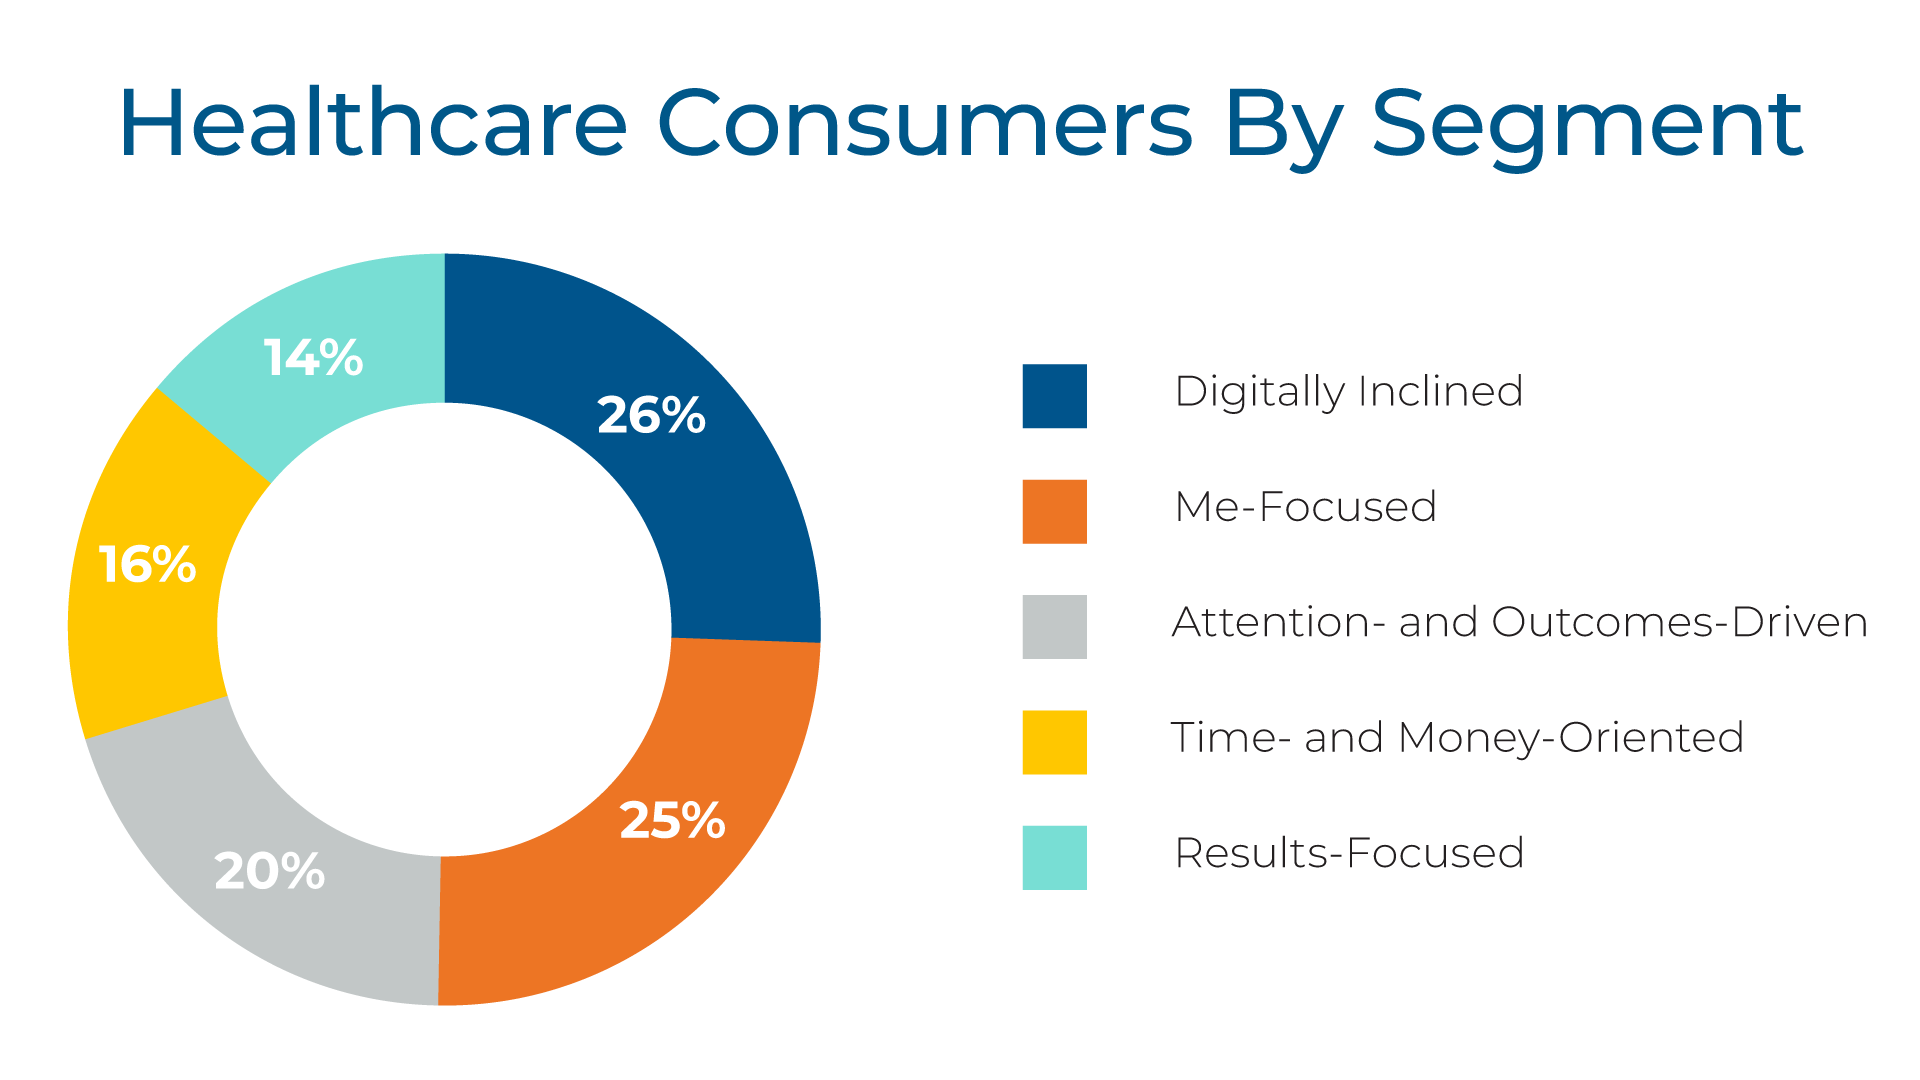 A donut chart of healthcare consumers by segment. The digitally inclined segment represents 26% of consumers surveyed, me-focused: 25%, attention- and outcomes-driven: 20%, time- and money-oriented: 16%, and results-focused: 14%.